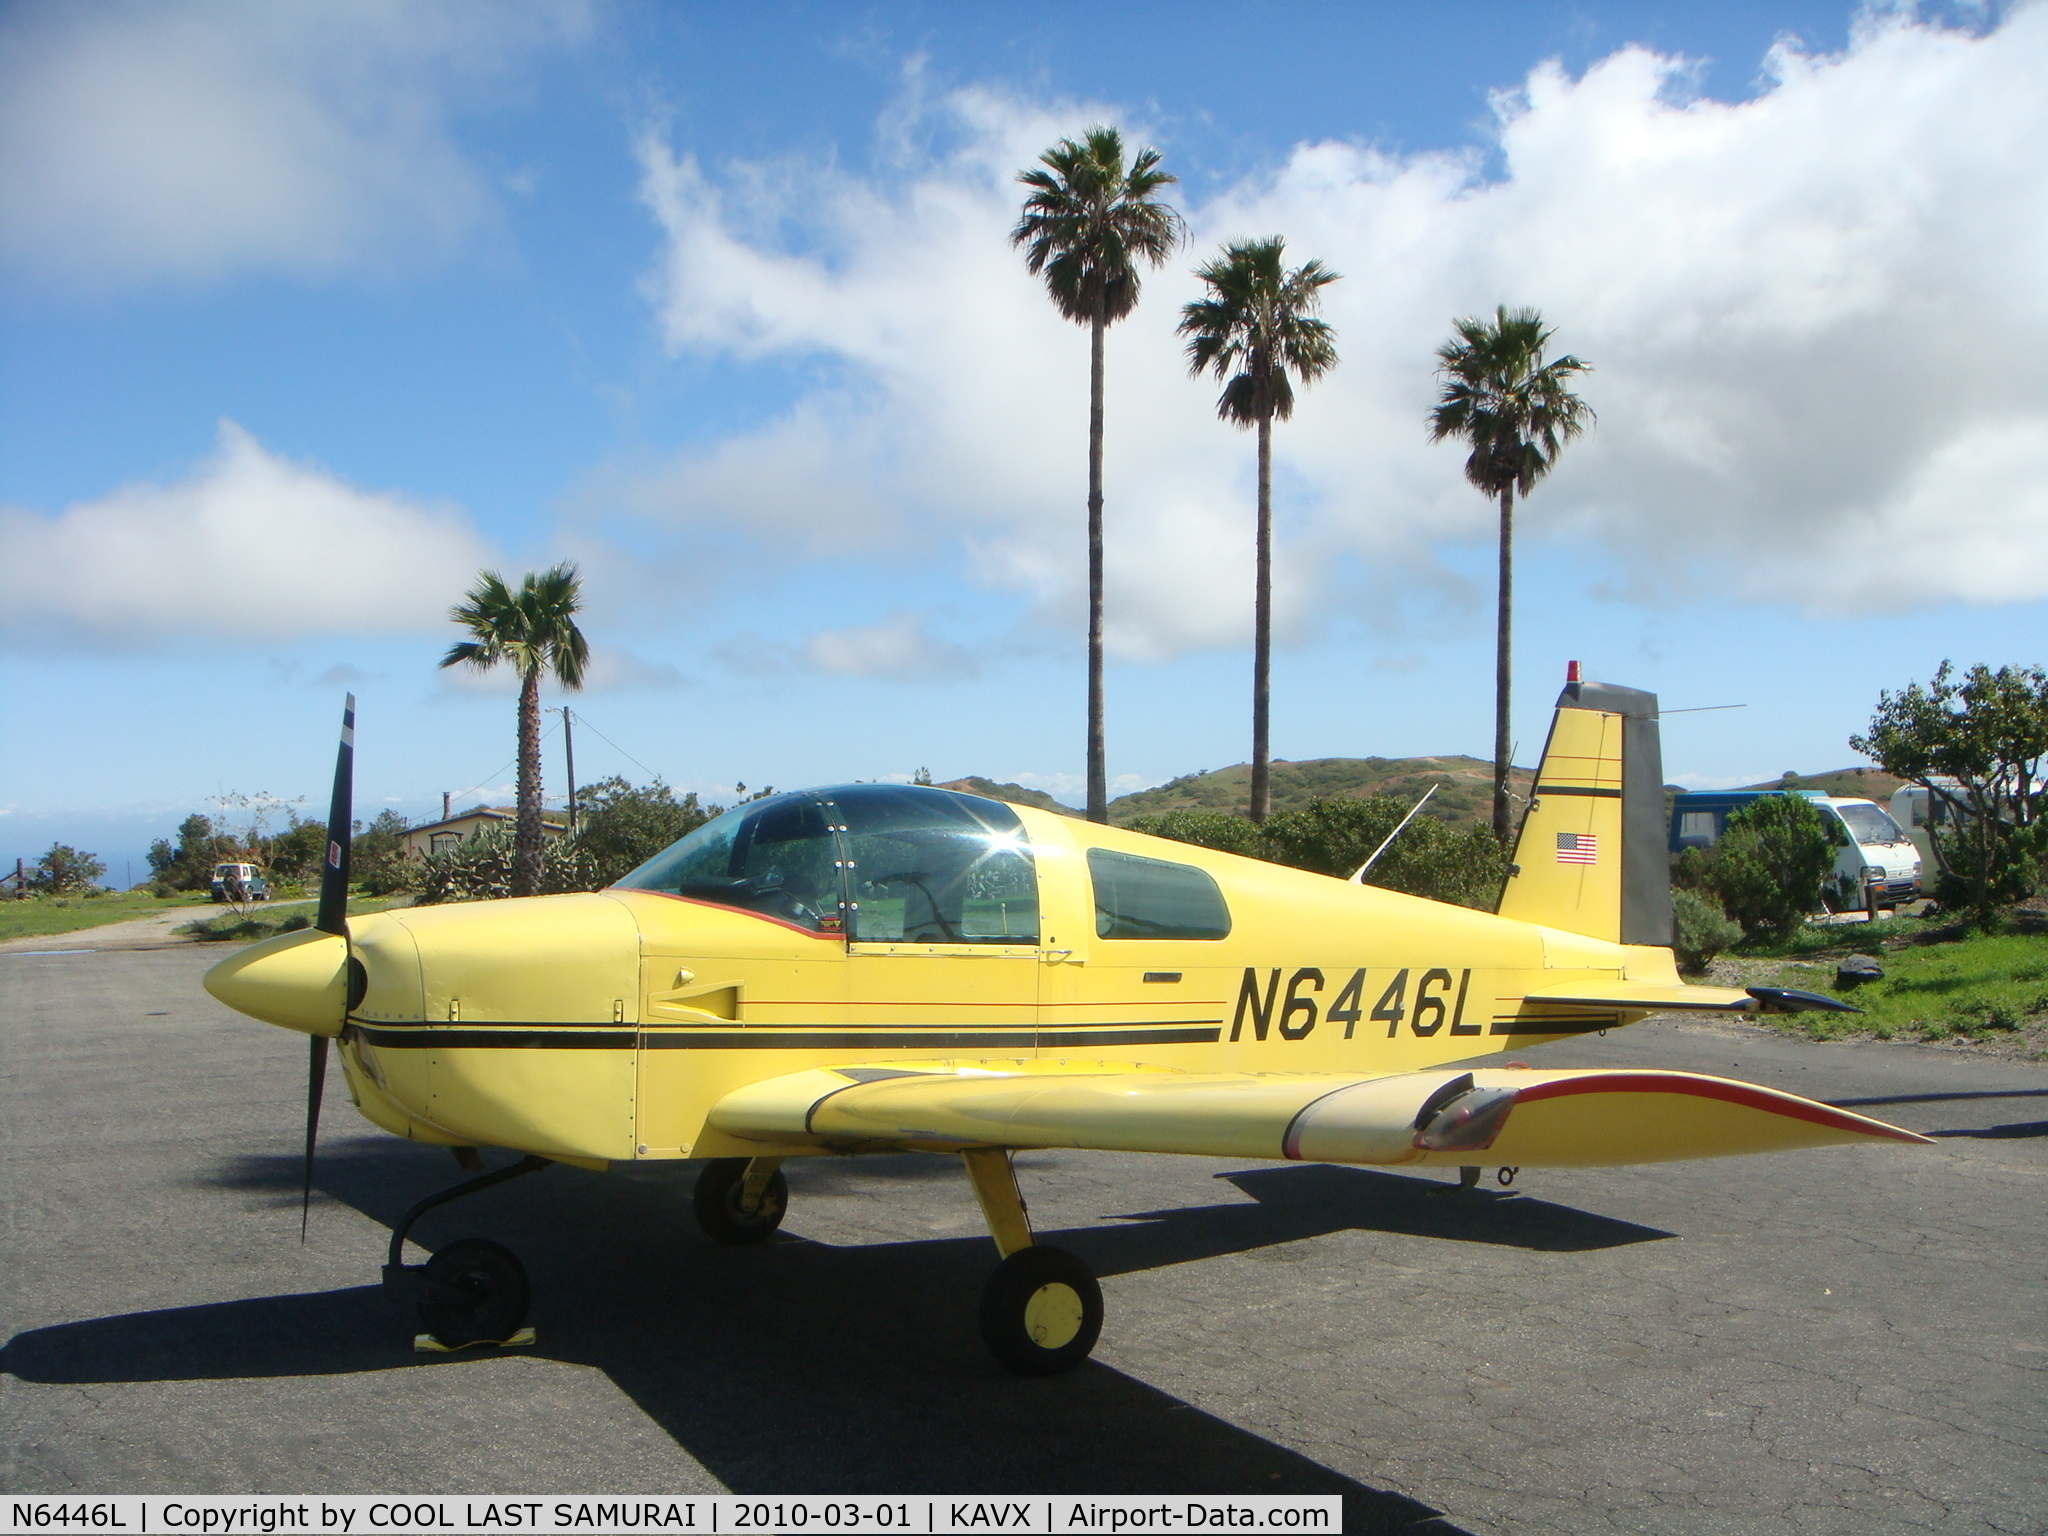 N6446L, 1972 American Aviation AA-1A Trainer C/N AA1A-0446, Avalon Catalina Airport Transient Parking (photo by Fuchieh)